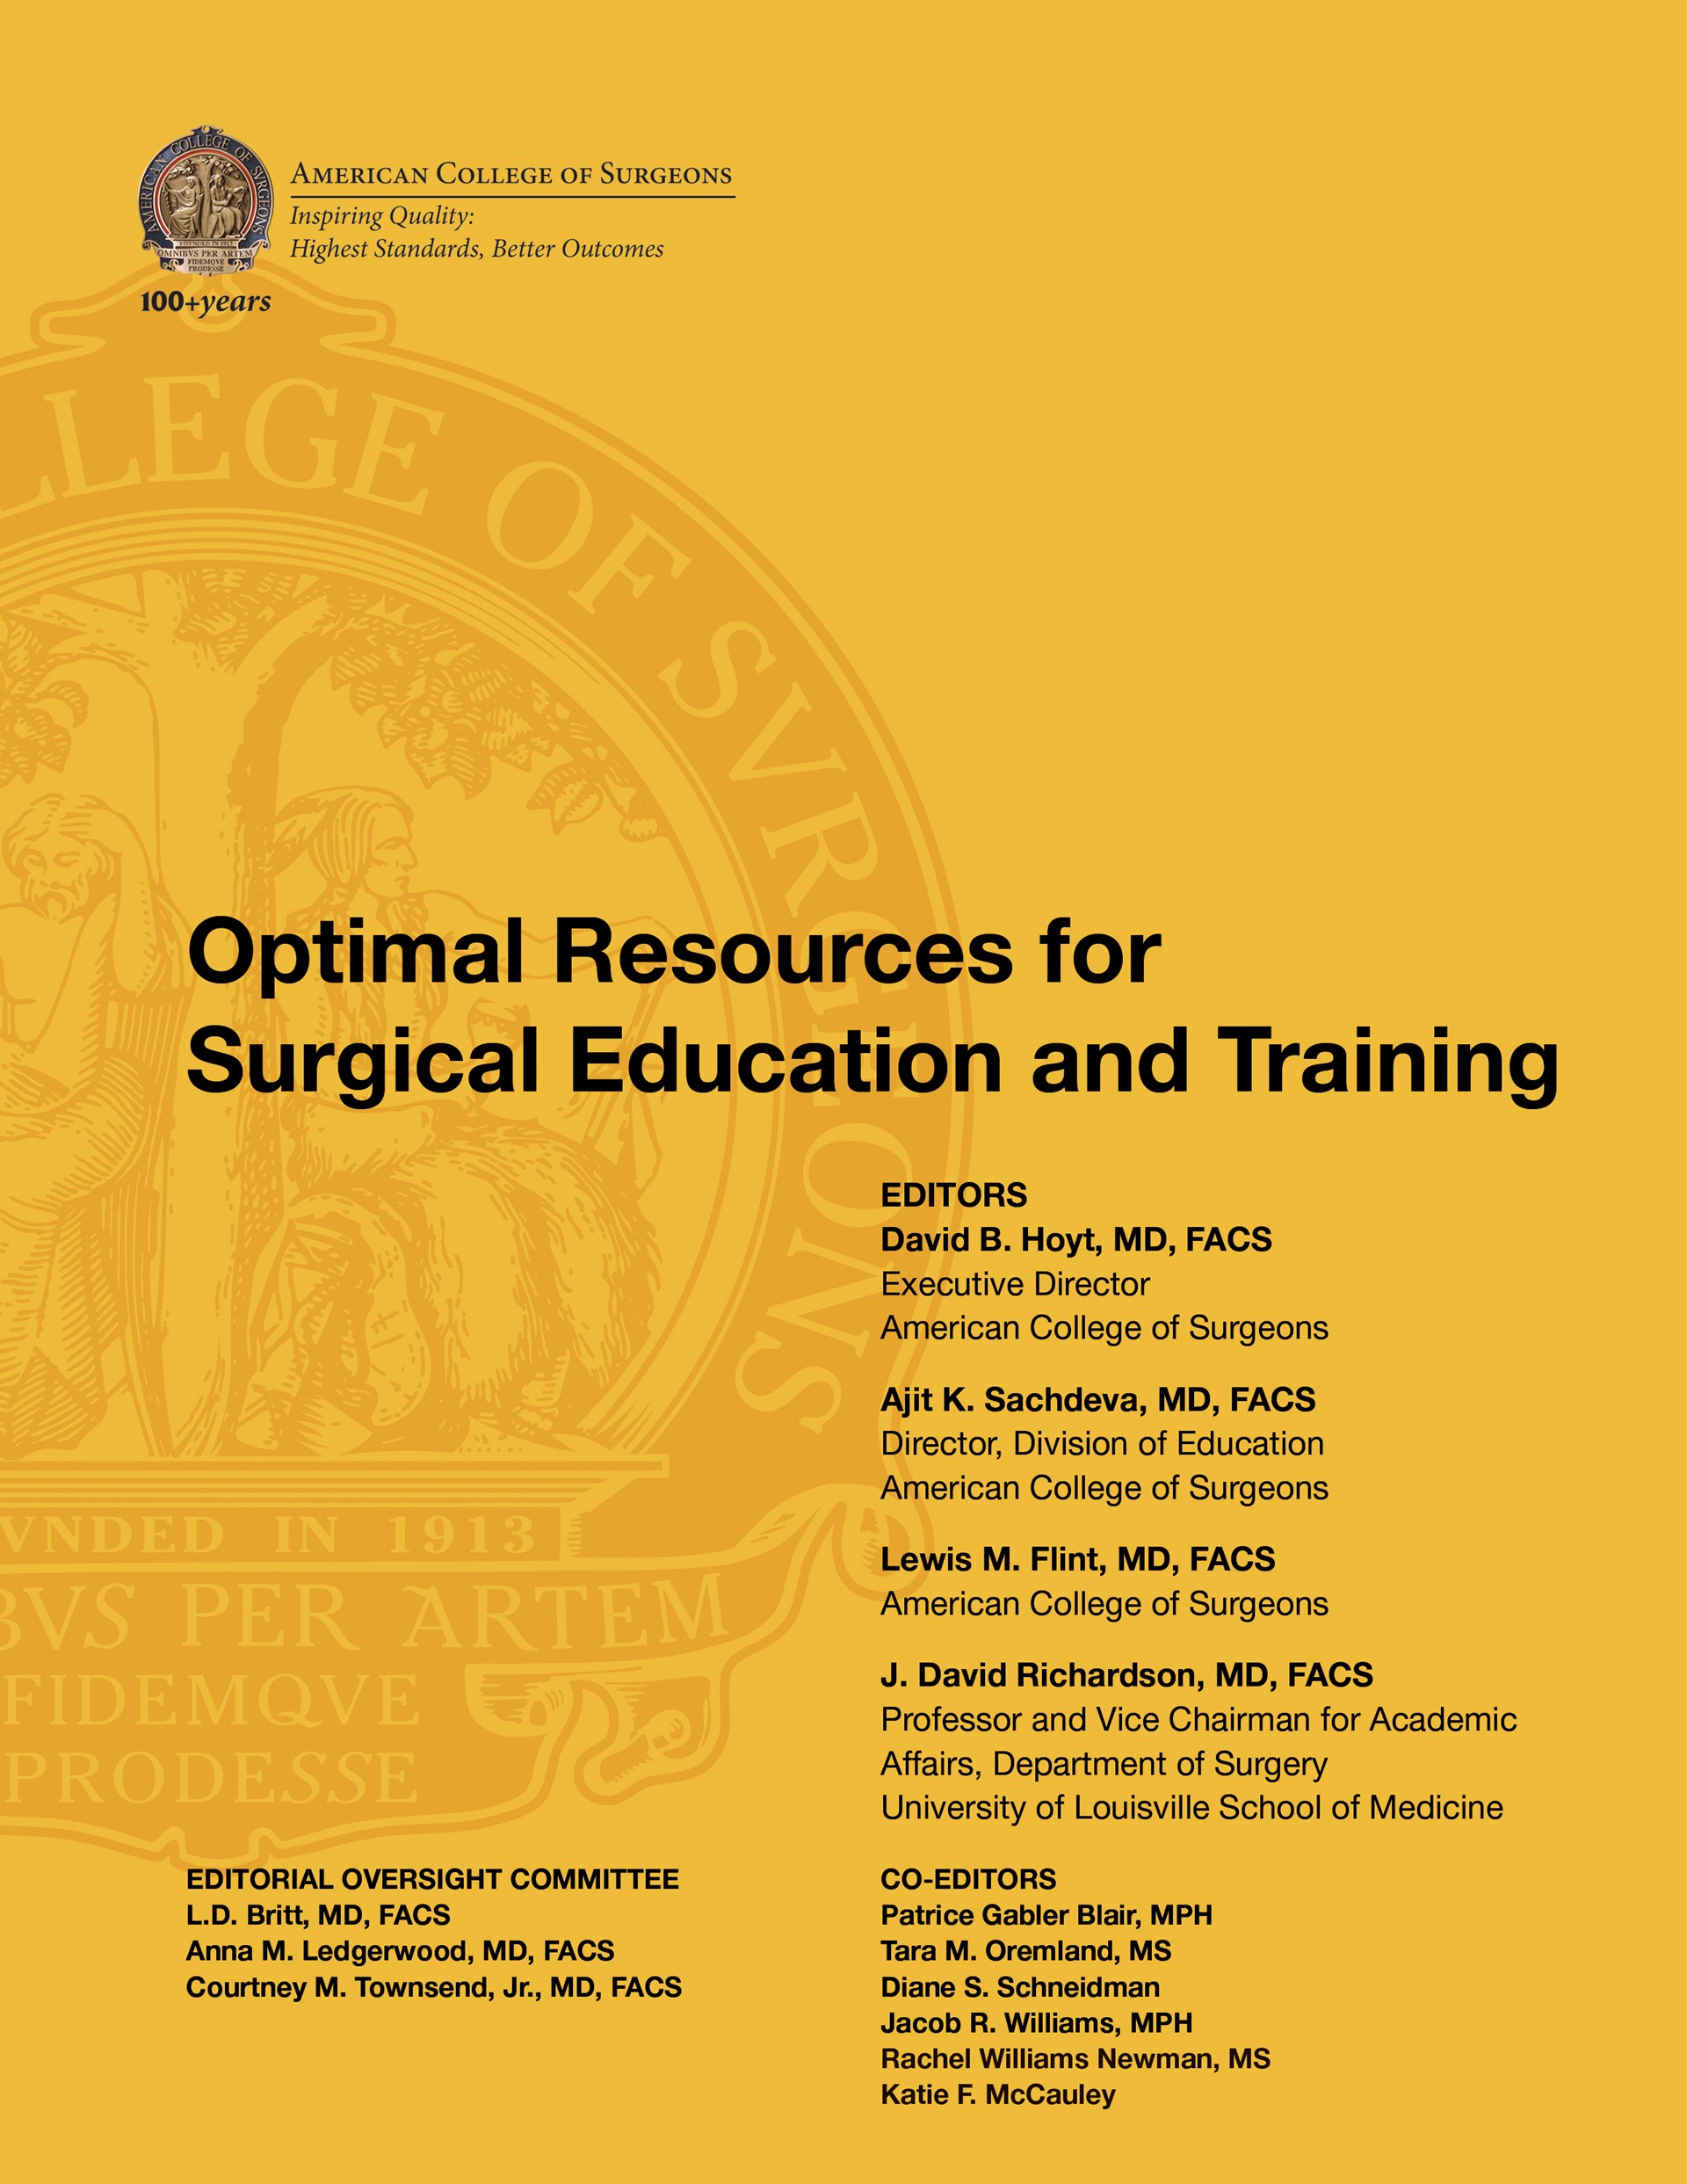 Optimal Resources for Surgical Education and Training